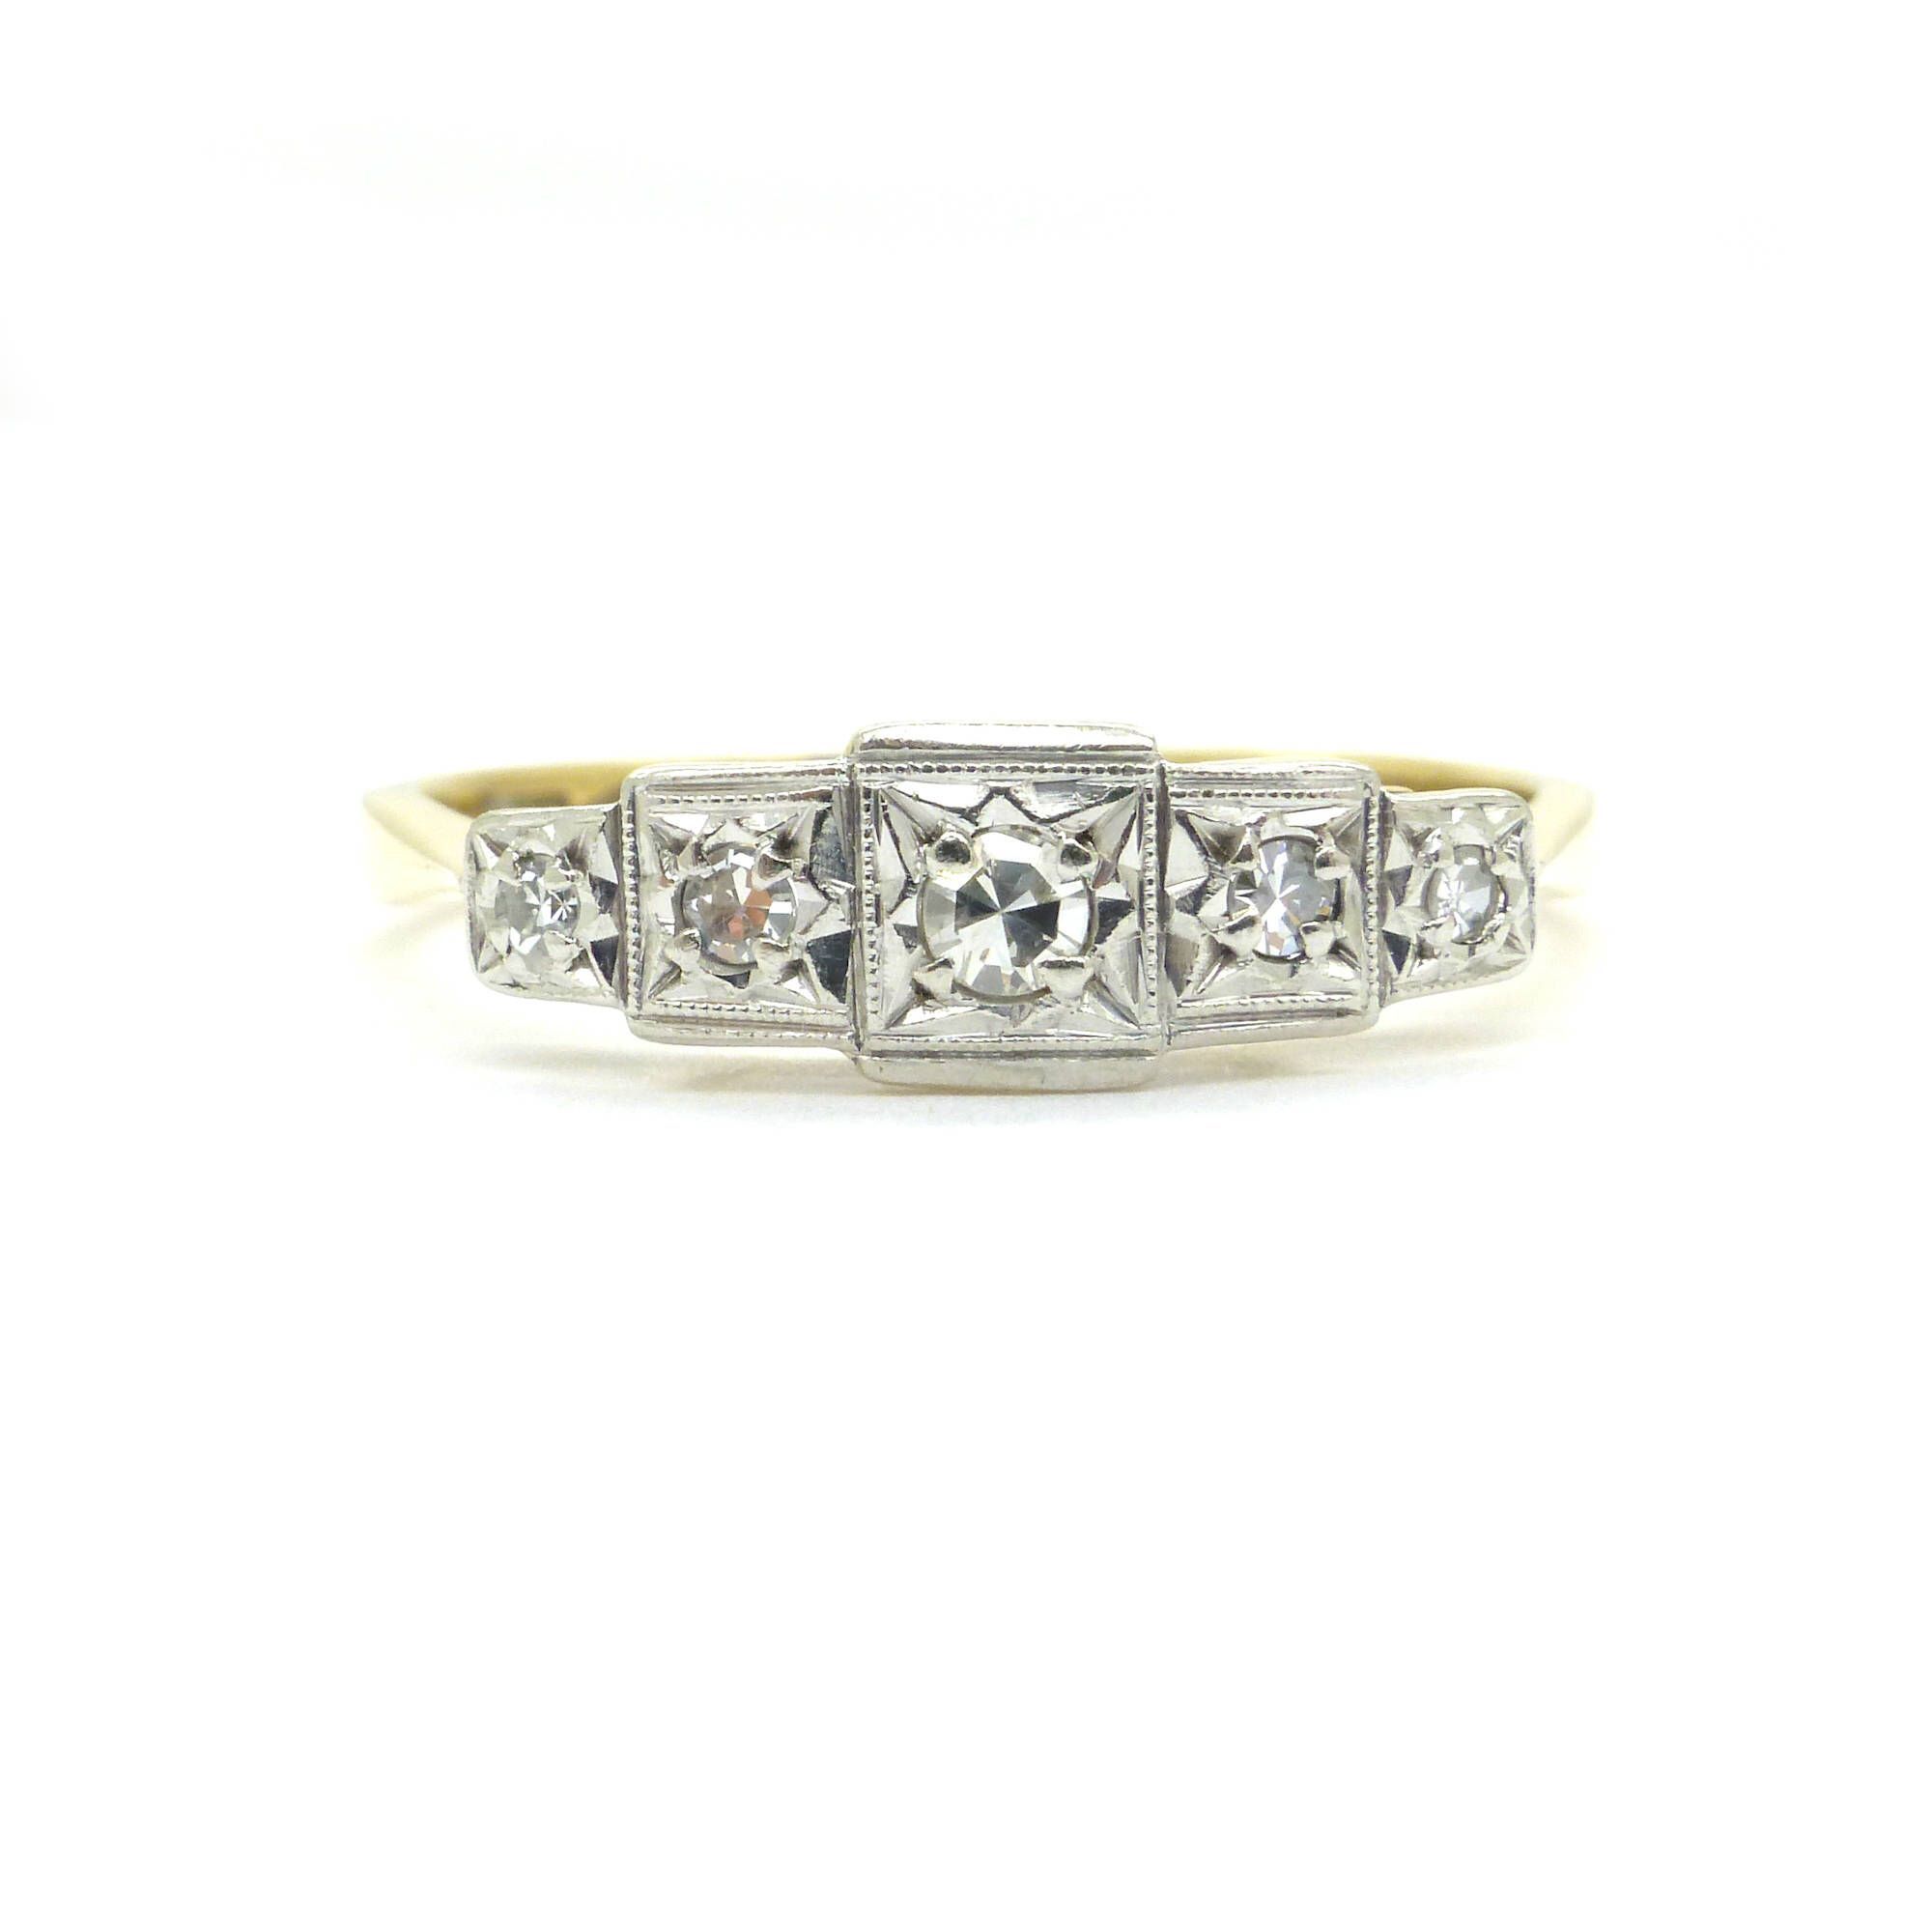 1920's Engagement Ring Art Deco 9ct Gold Platinum Diamond Pertaining To Recent Diamond Five Stone Anniversary Bands In Gold (View 21 of 25)